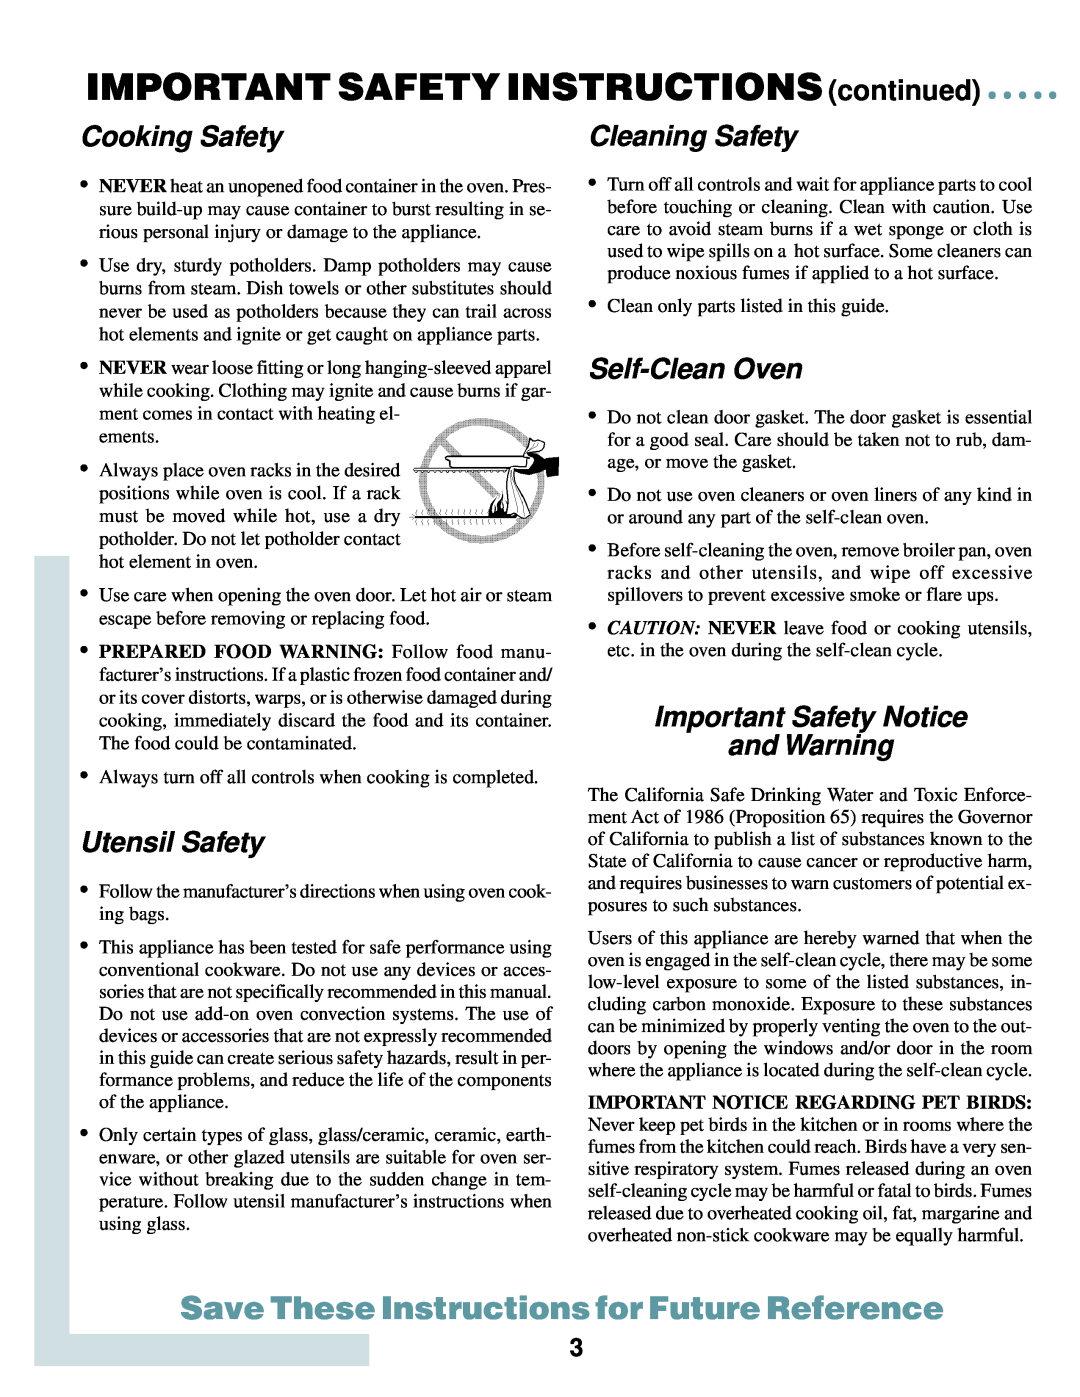 Maytag MEW5630 IMPORTANT SAFETY INSTRUCTIONS continued, Cooking Safety, Utensil Safety, Cleaning Safety, Self-CleanOven 